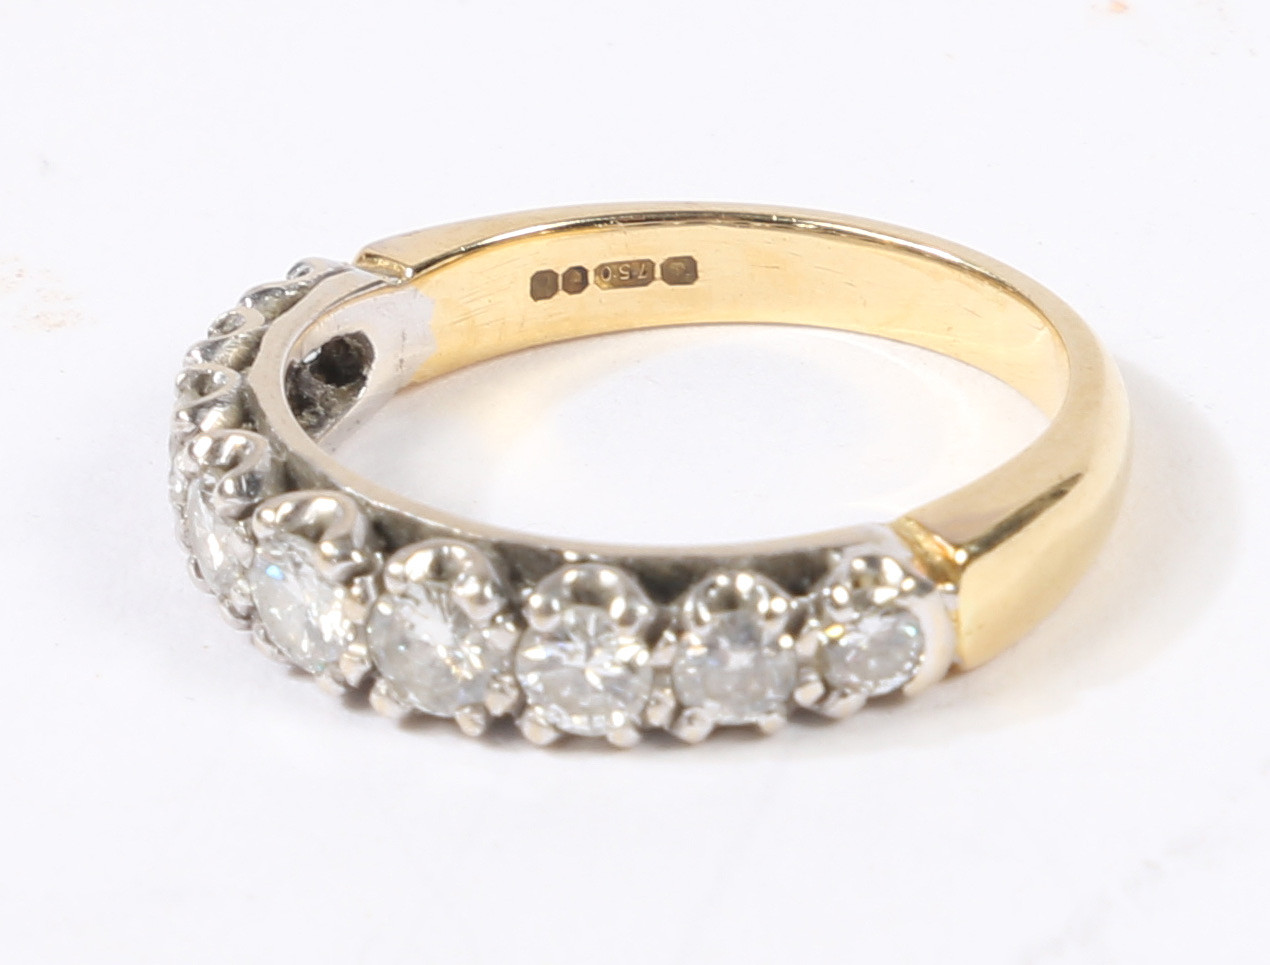 AN 18 CARAT GOLD AND DIAMOND RING. - Image 2 of 5